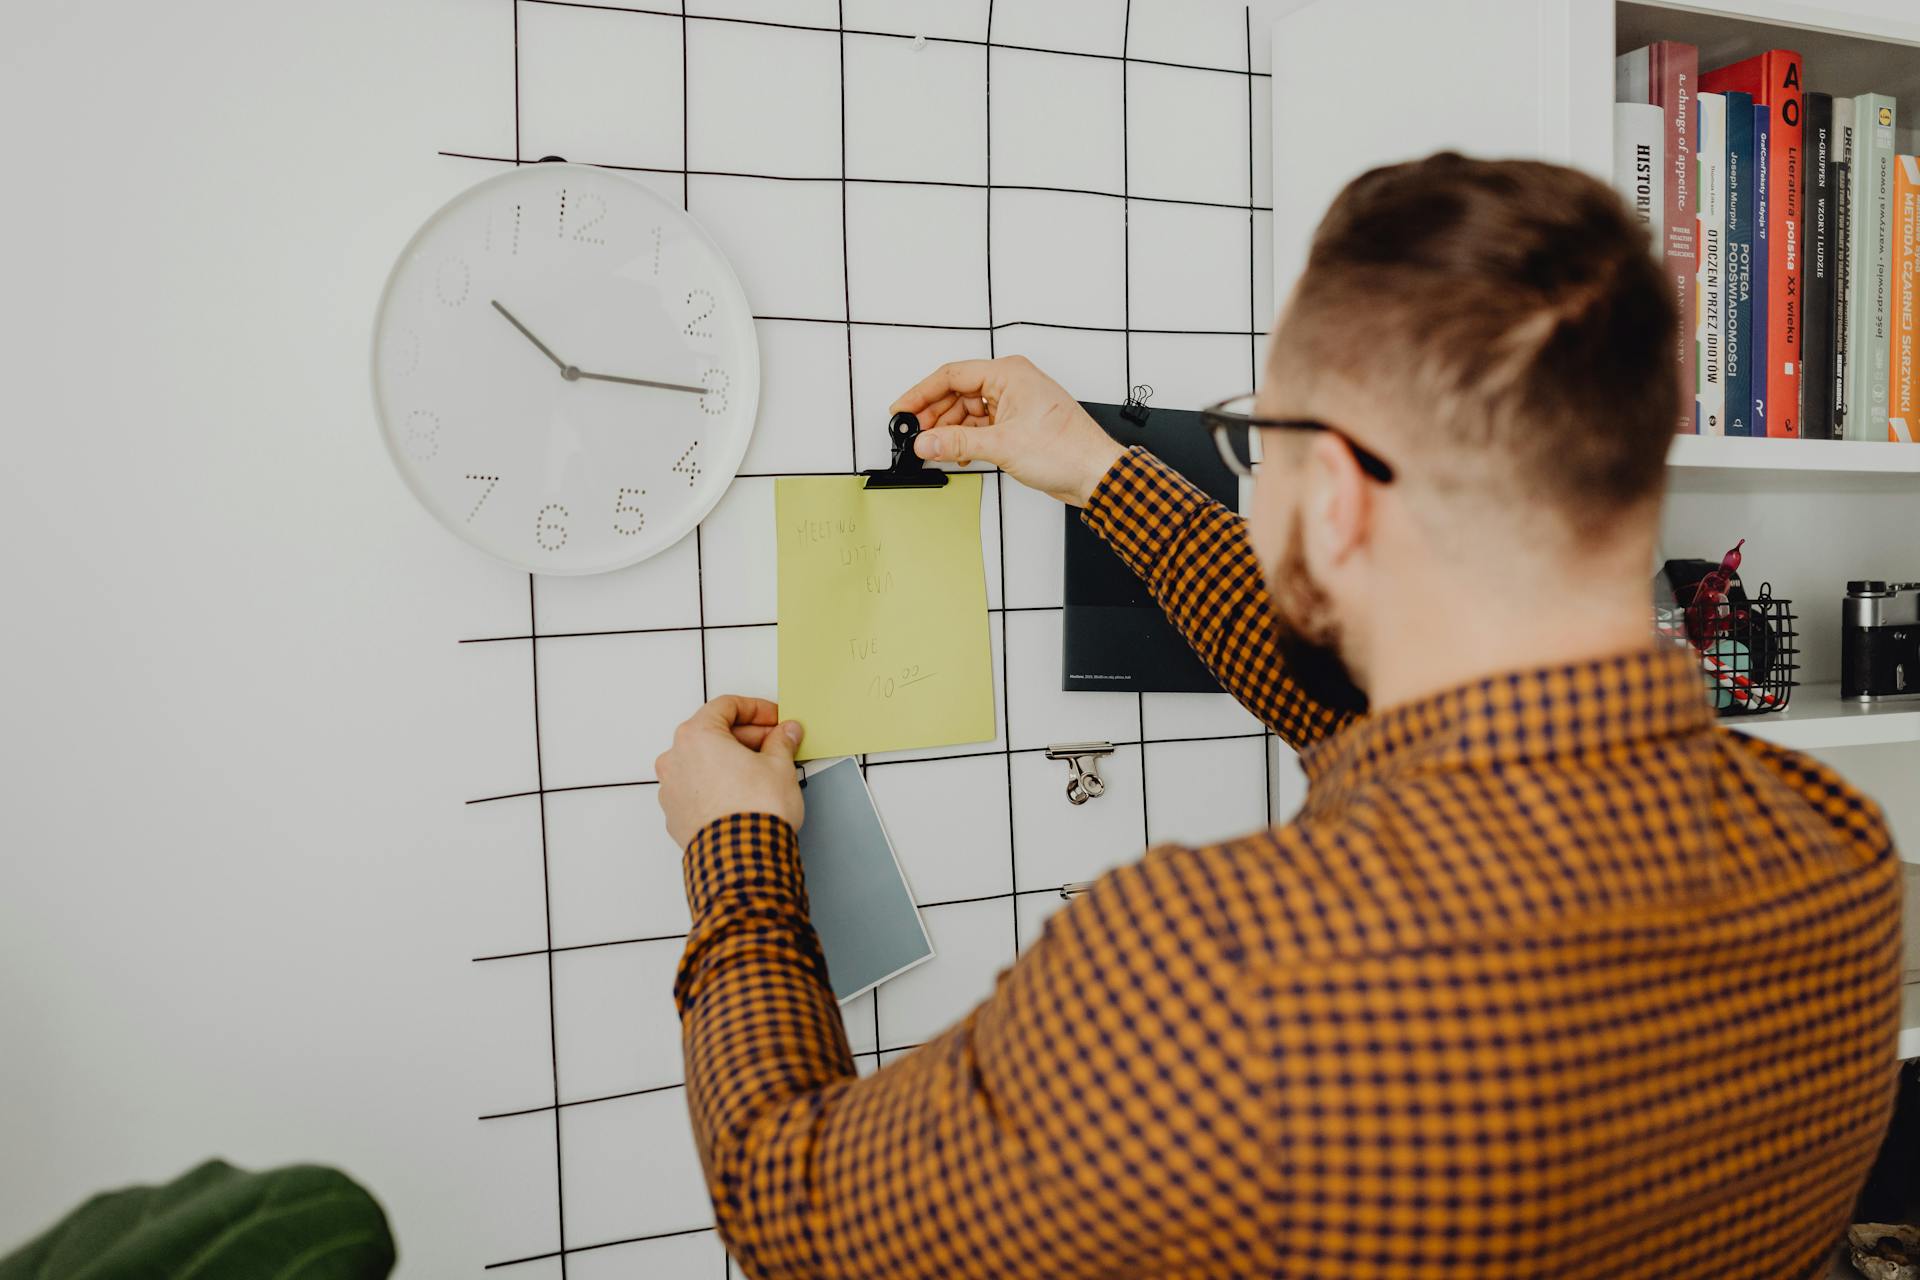 A Man Clipping a Schedule on the Wall Grid